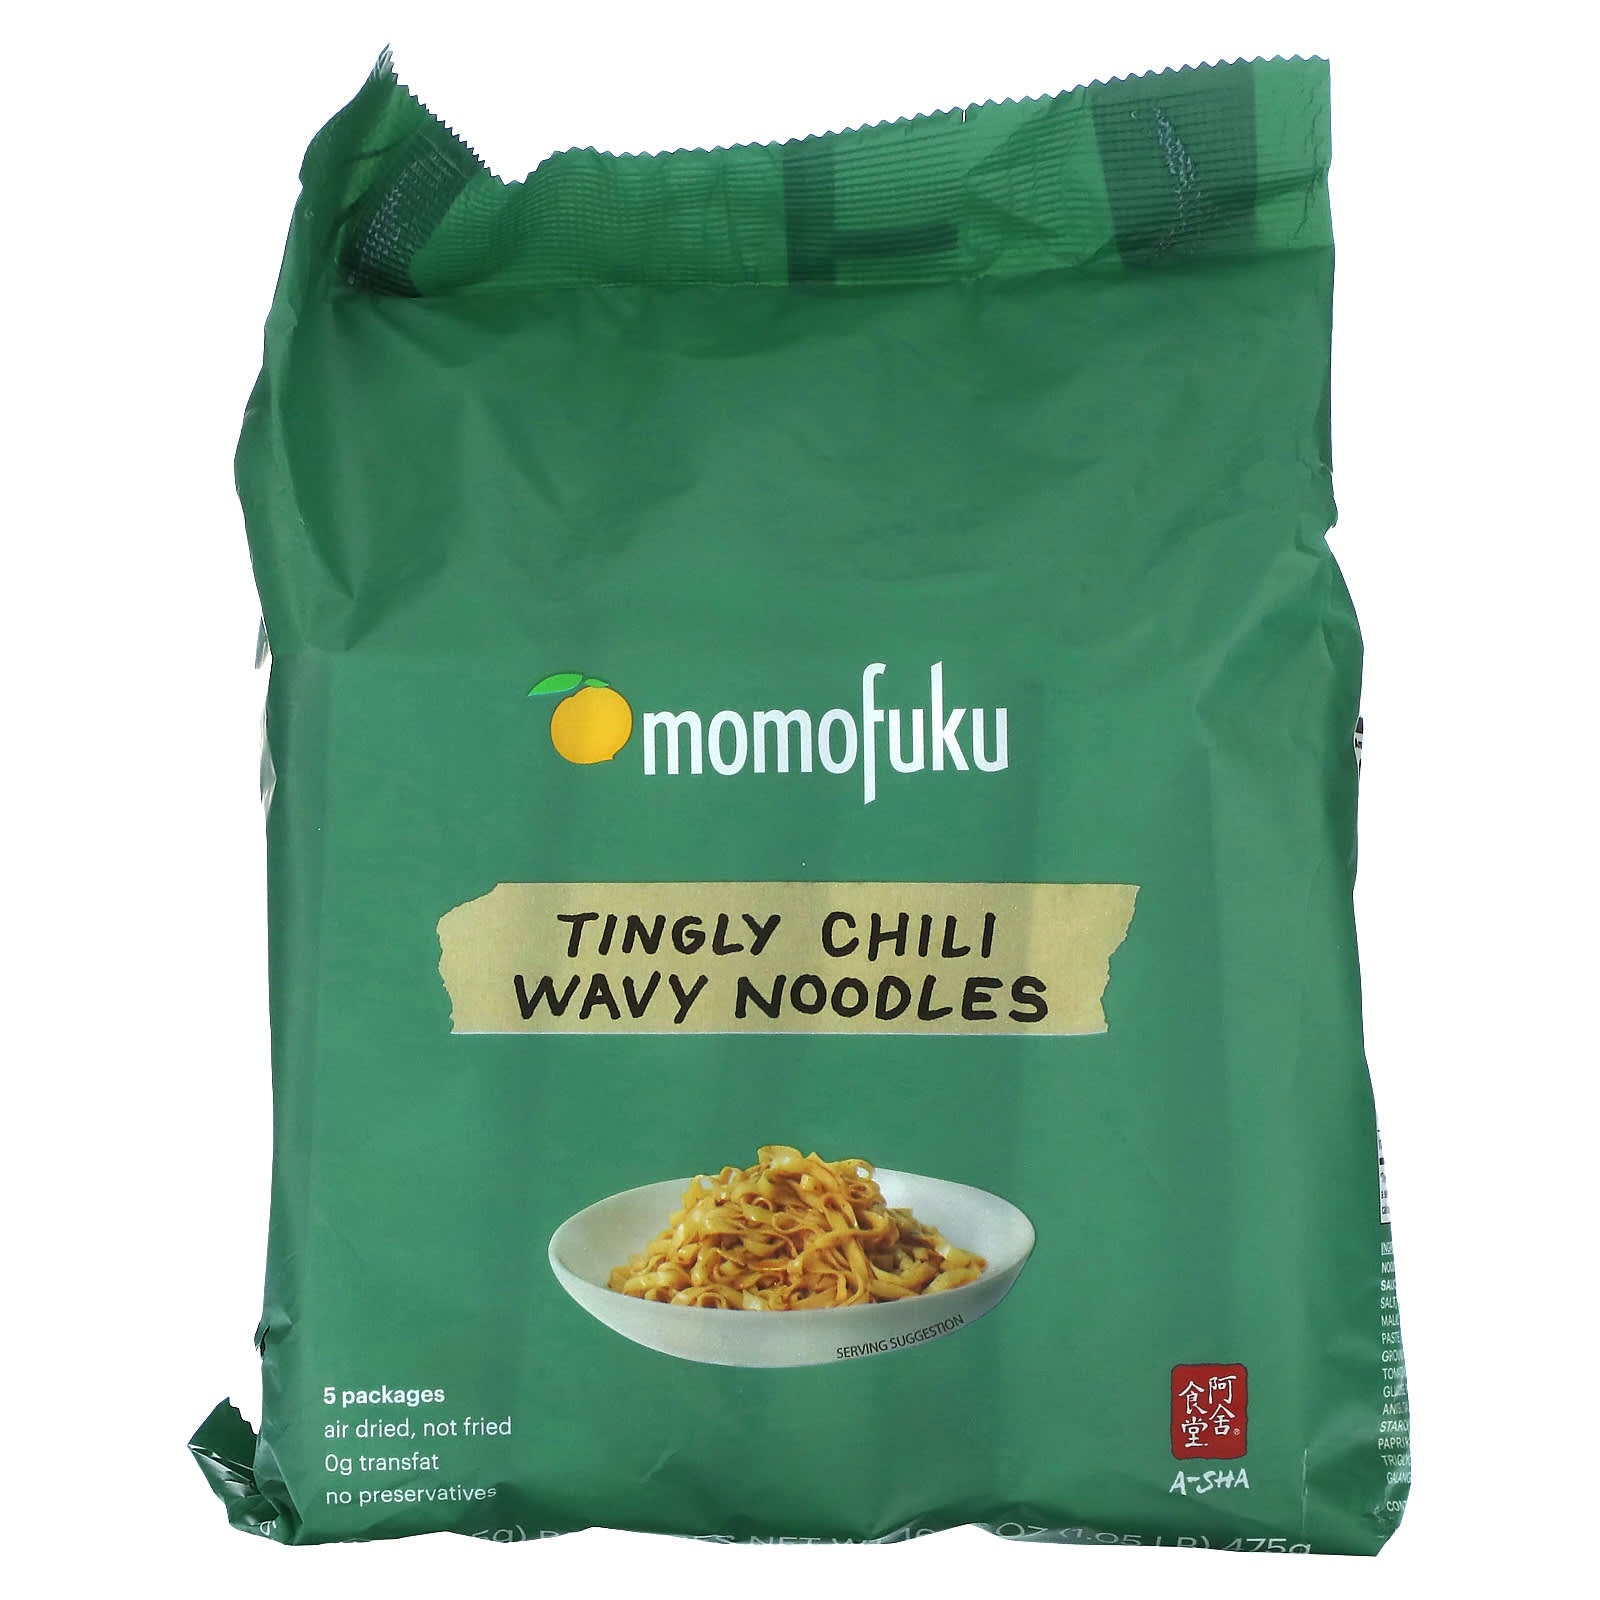 Momofuku-Tingly Chili Wavy Noodles-5 Packages 3.35 oz. (95 g) Each